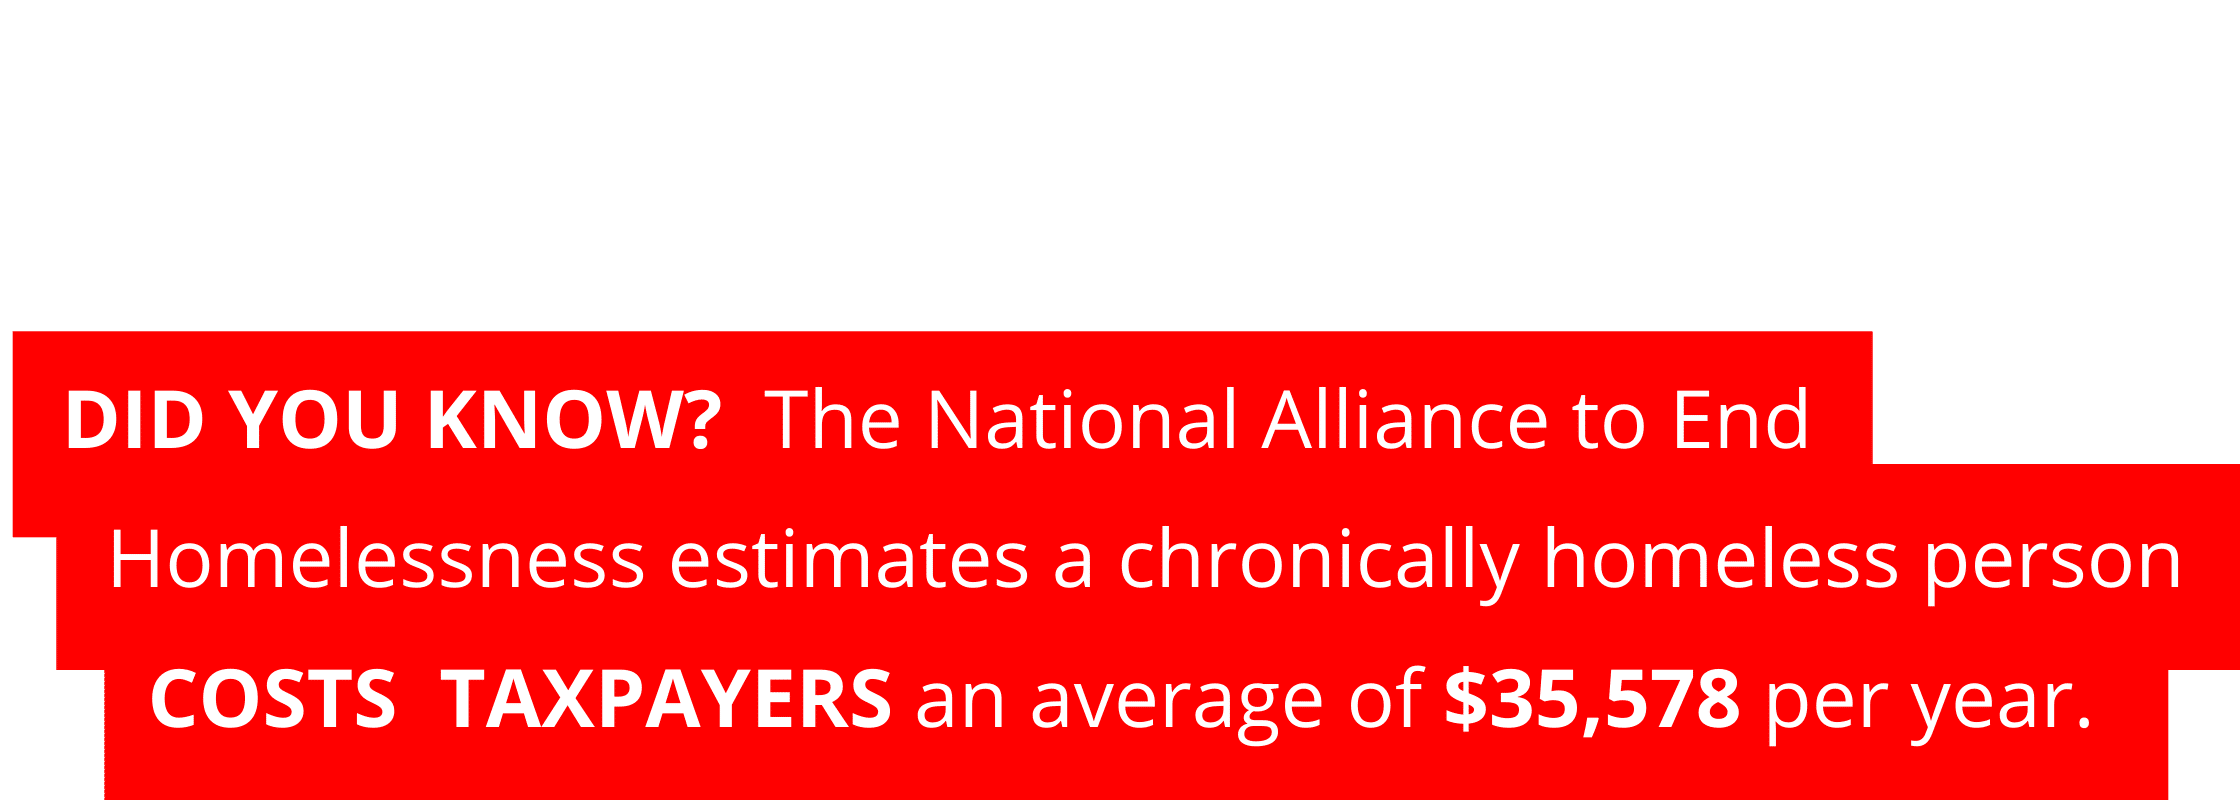 DID YOU KNOW? The National Alliance to End Homelessness estimates a chronically homeless person costs taxpayers an average of $35,578 per year.